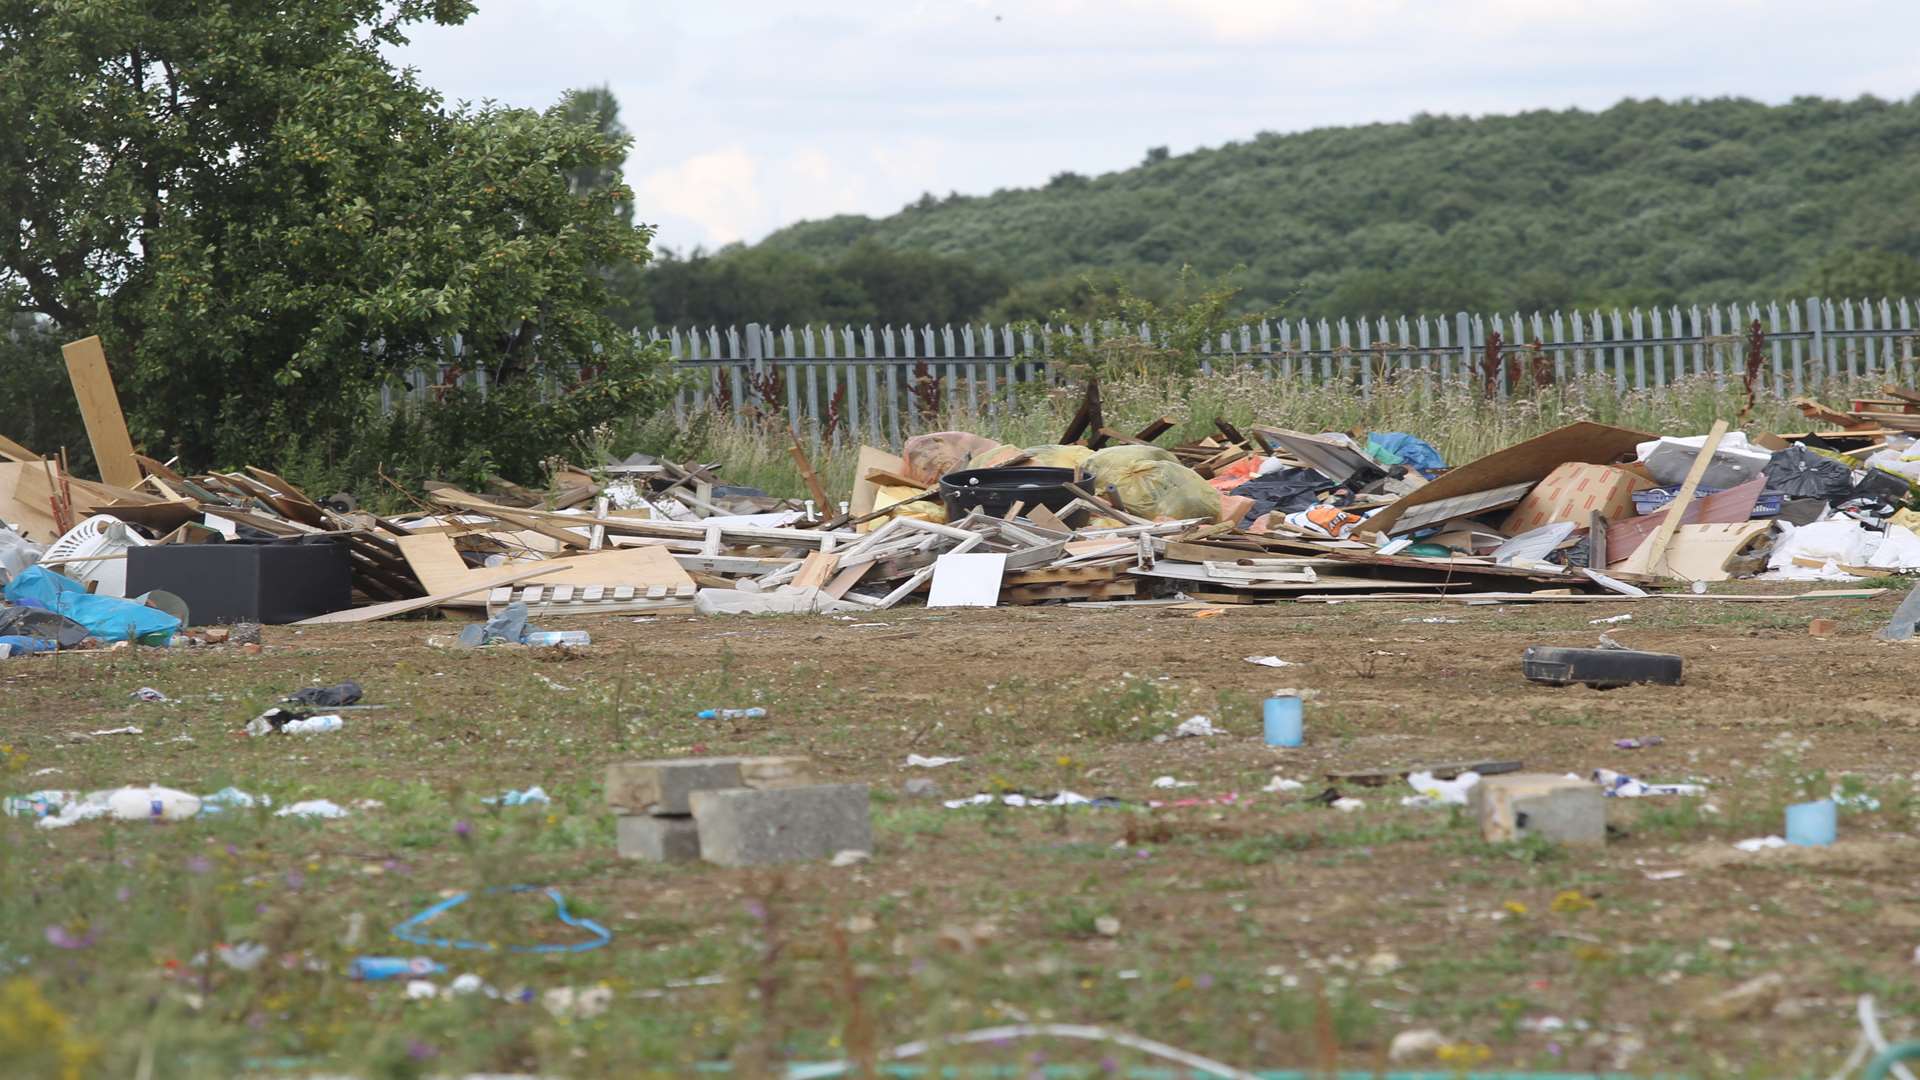 The aftermath of the camp after travellers left the site